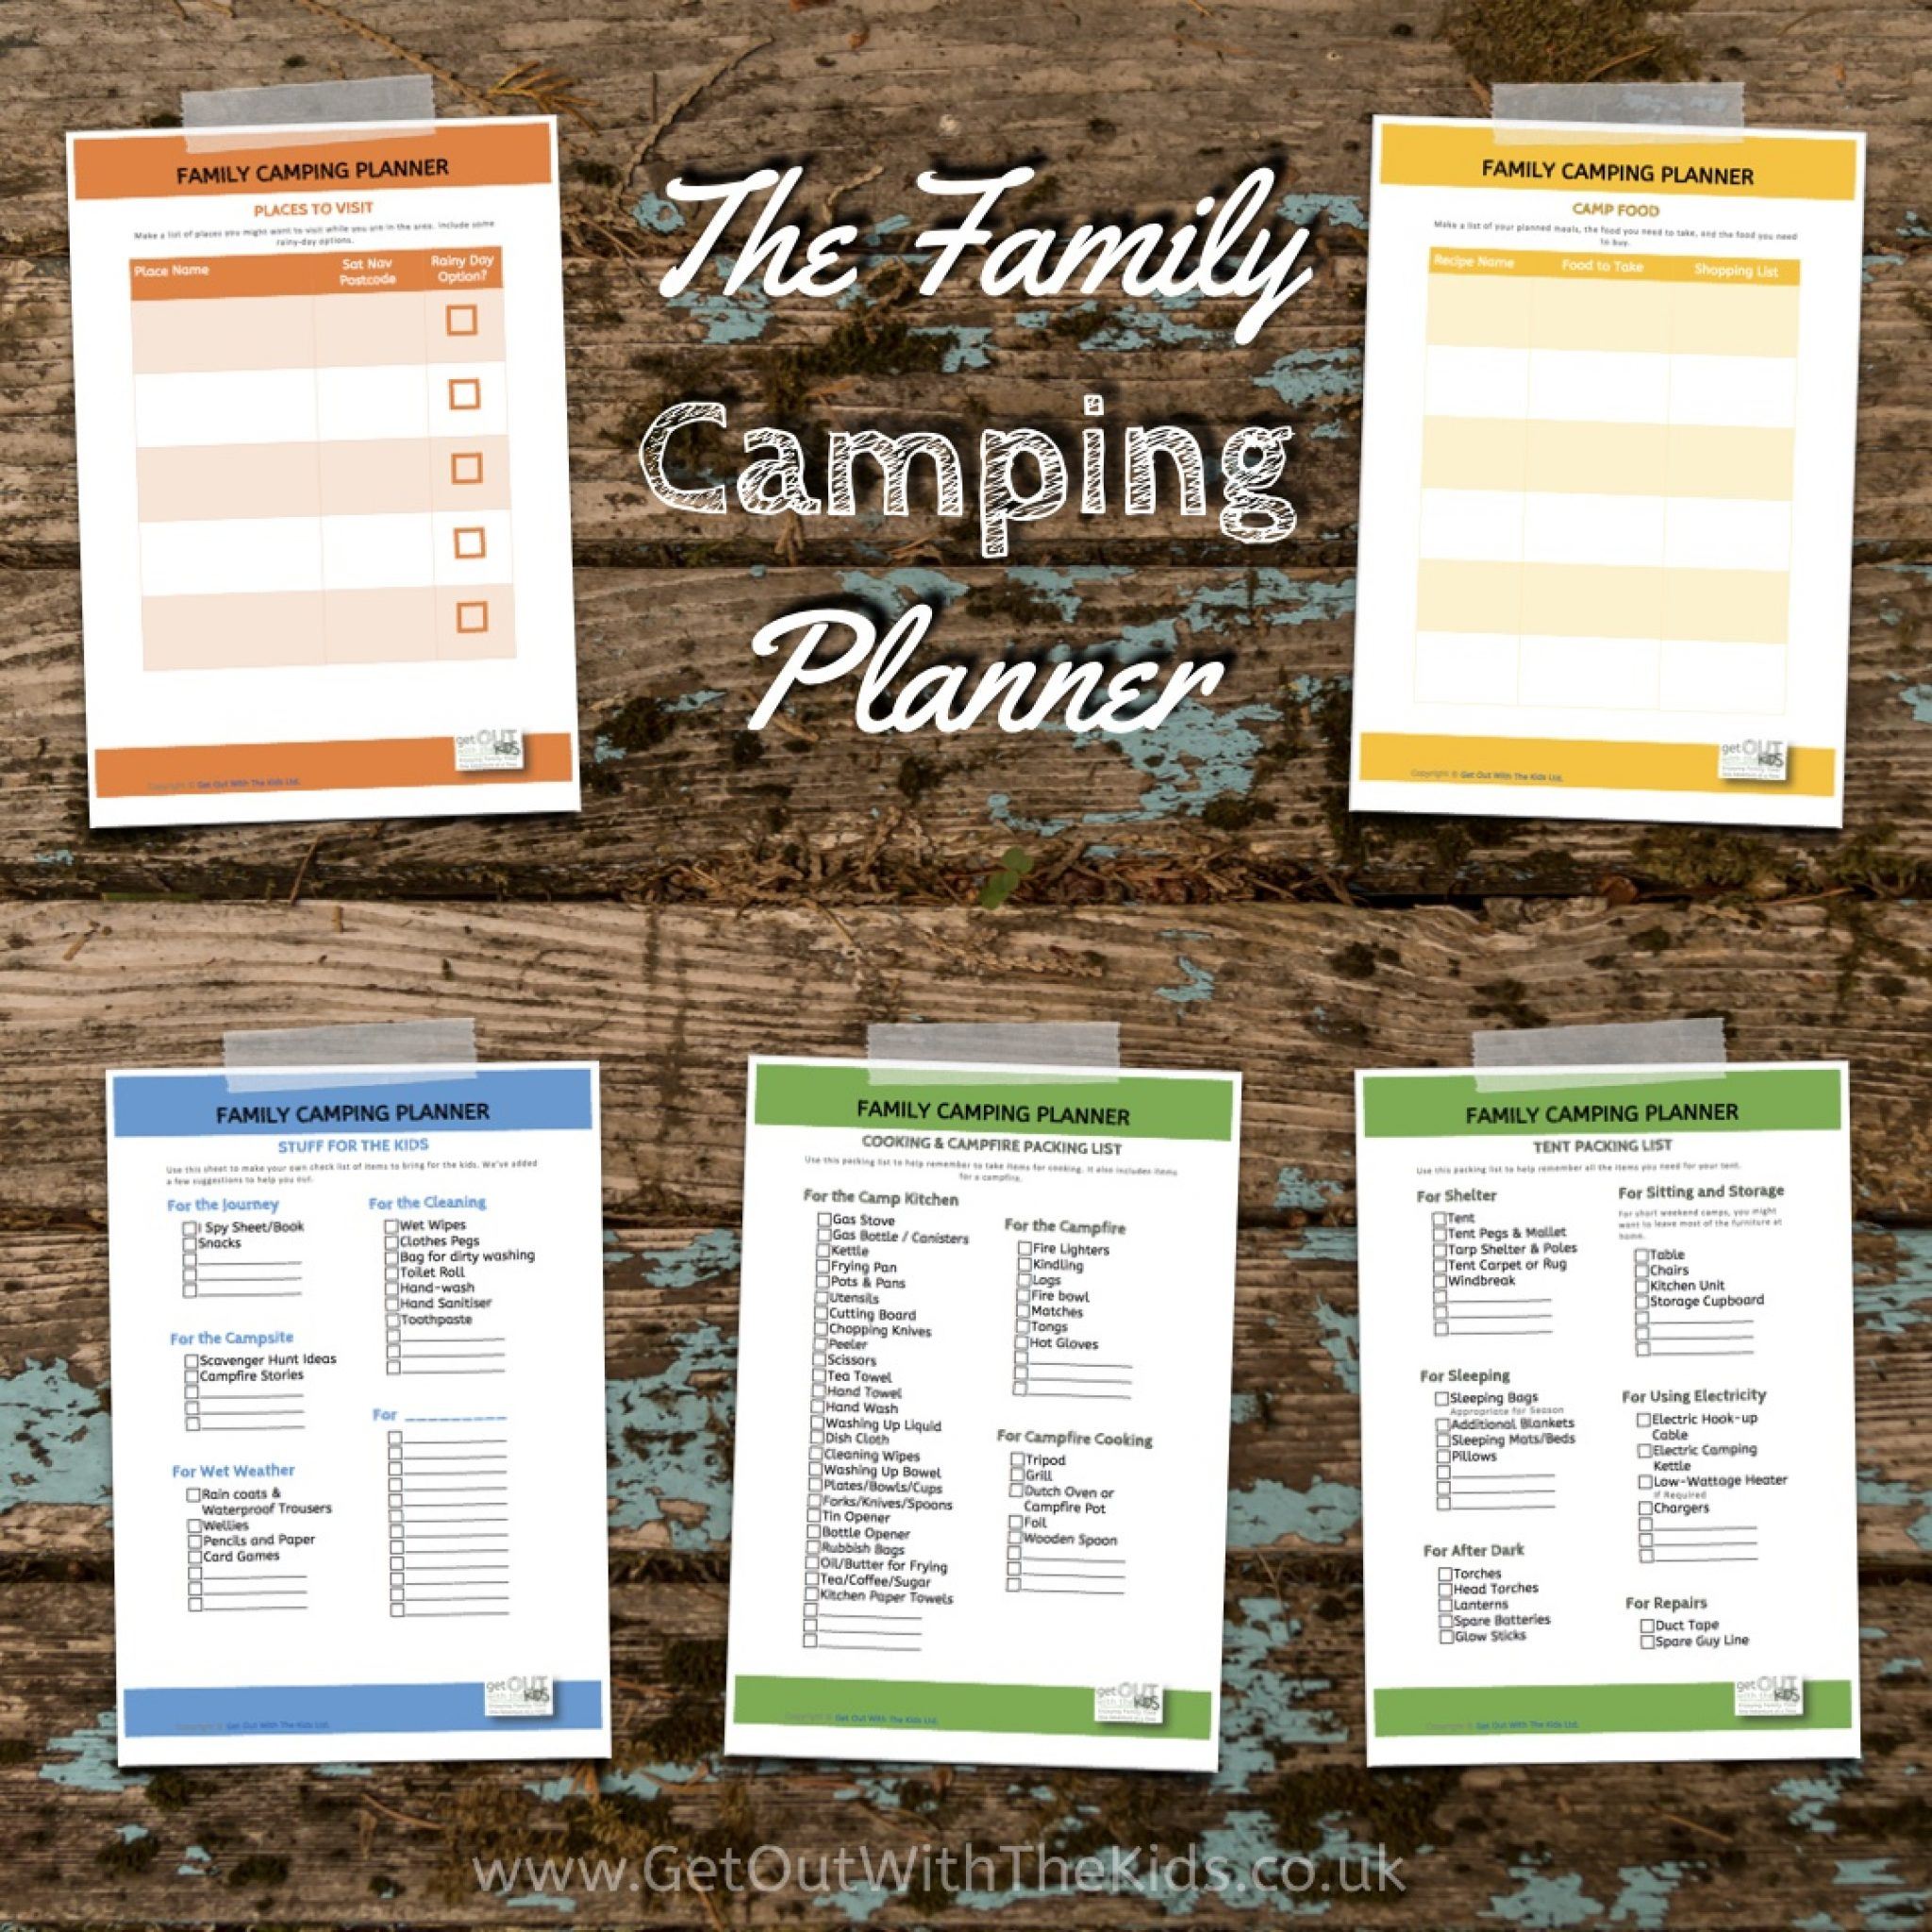 This planner has your camping packing checklist and a whole lot more. Download and print it out.